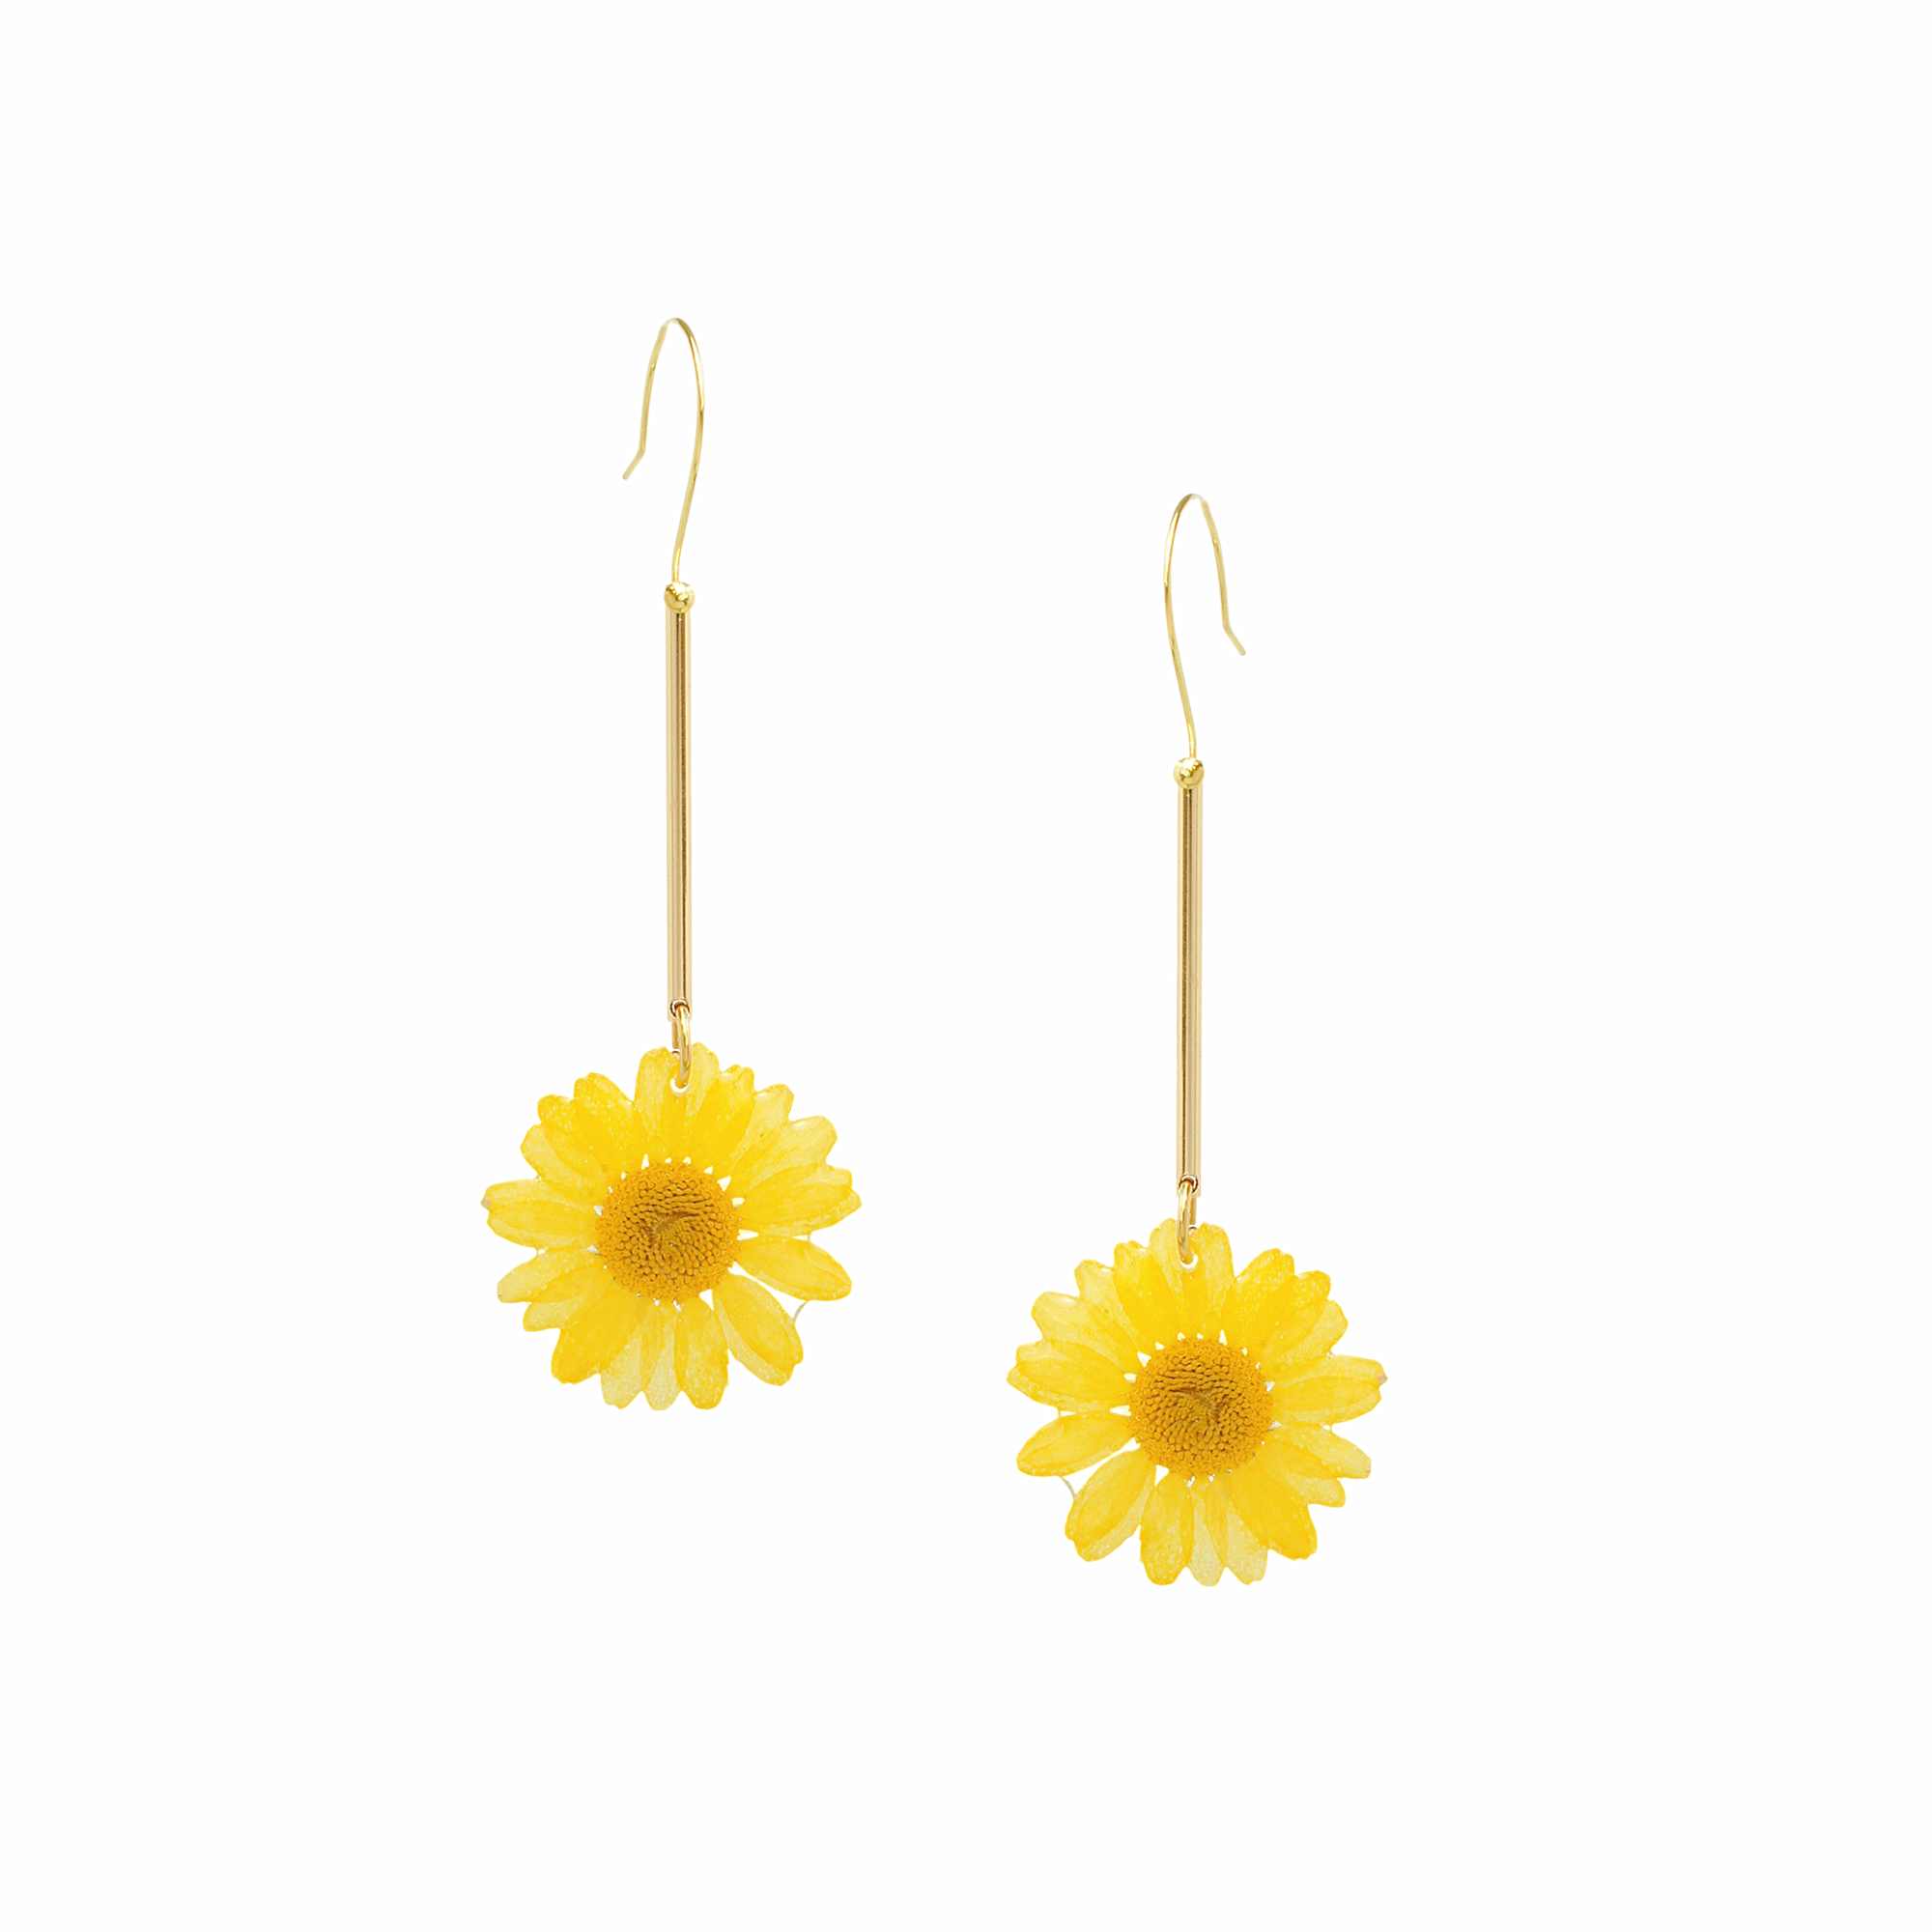 *REAL FLOWER* English Daisy Drop Earrings with 18k Gold Vermeil Hooks